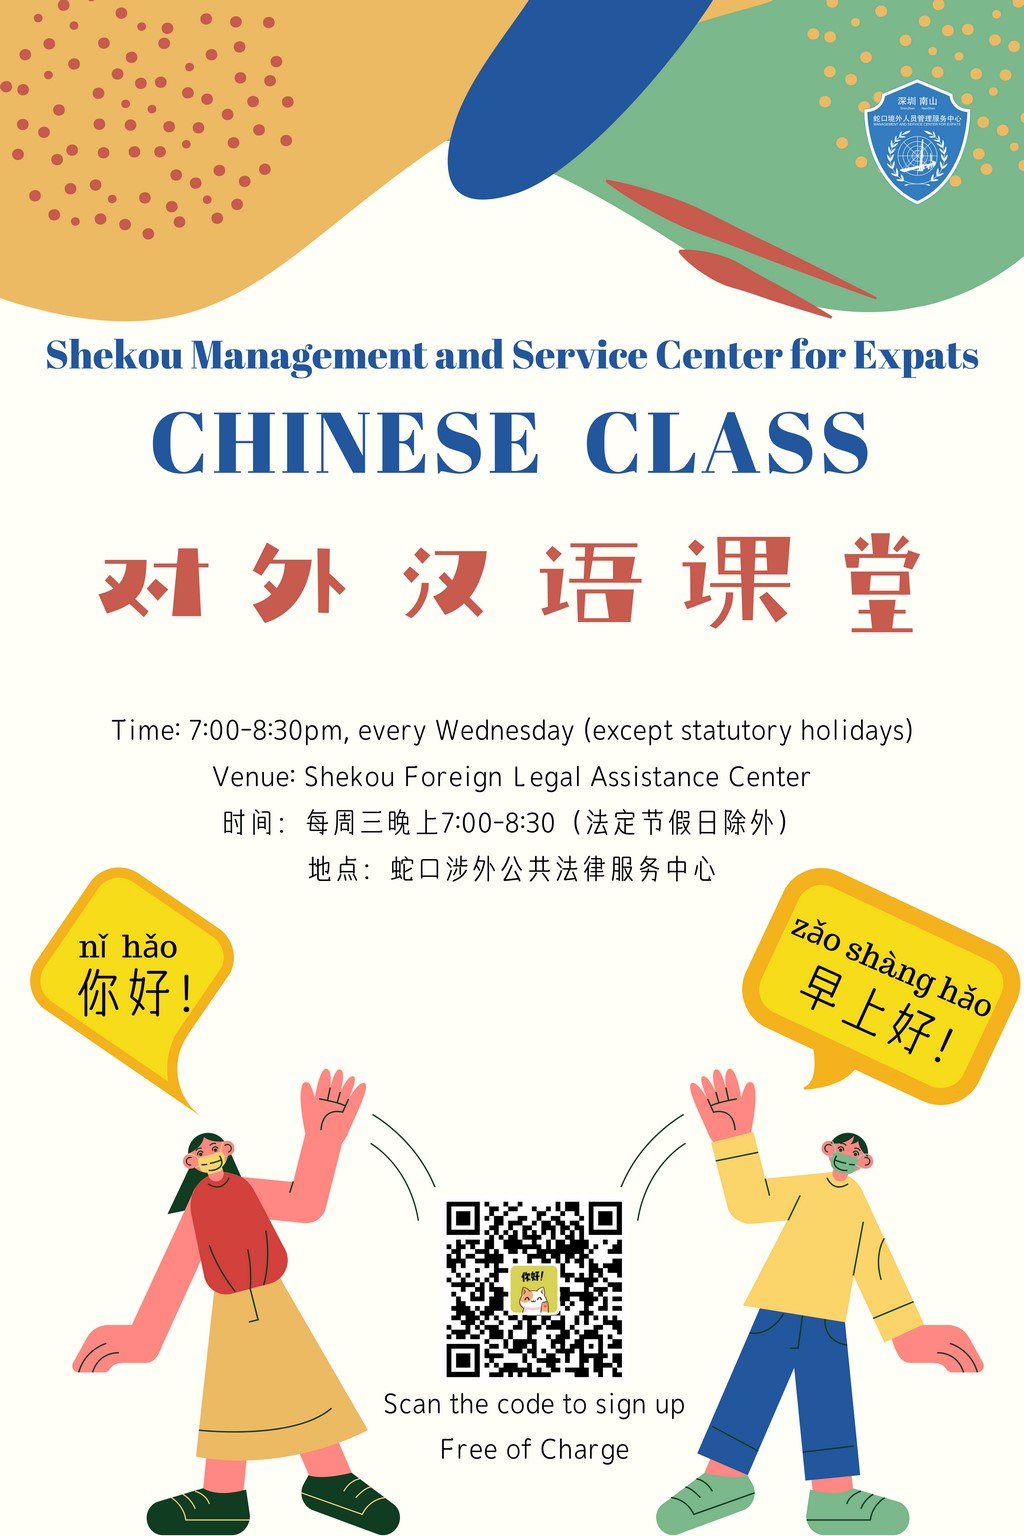 Featured image for “MSCE Shekou Chinese Class”